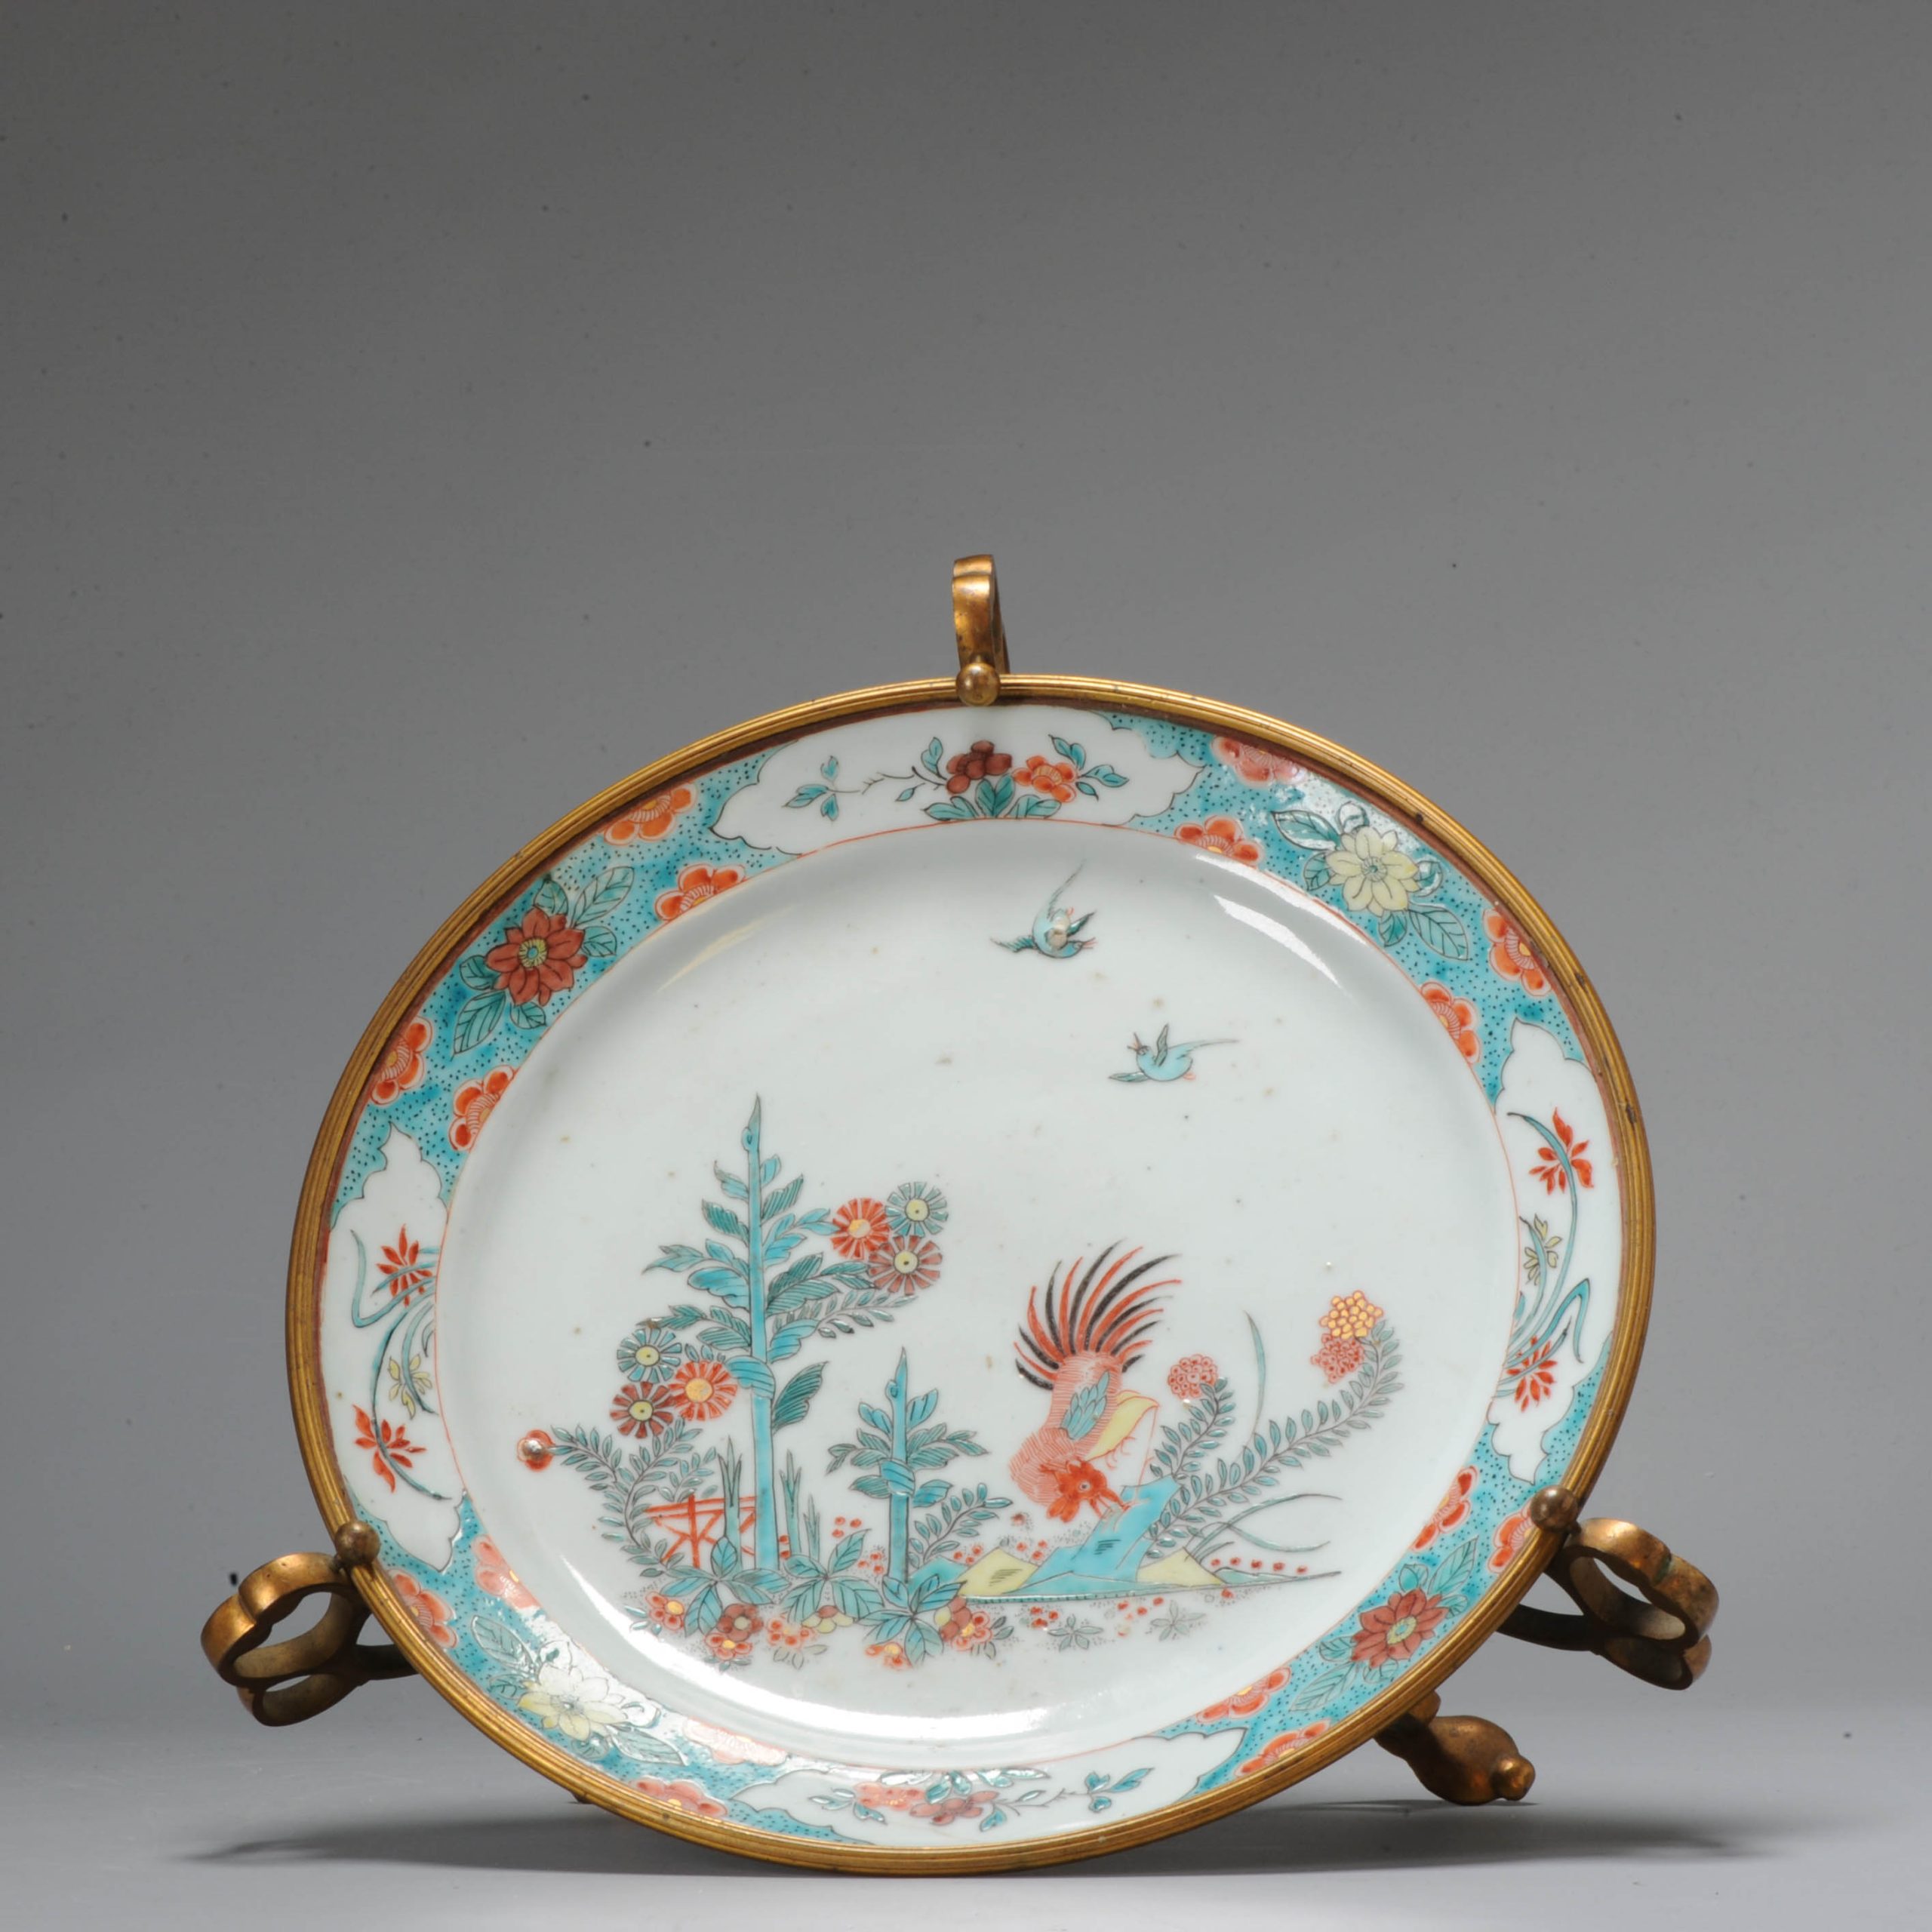 1028 Antique Chinese porcelain plate with Amsterdam Bont Kakiemon Decoration in Turqoise added French Ormulu